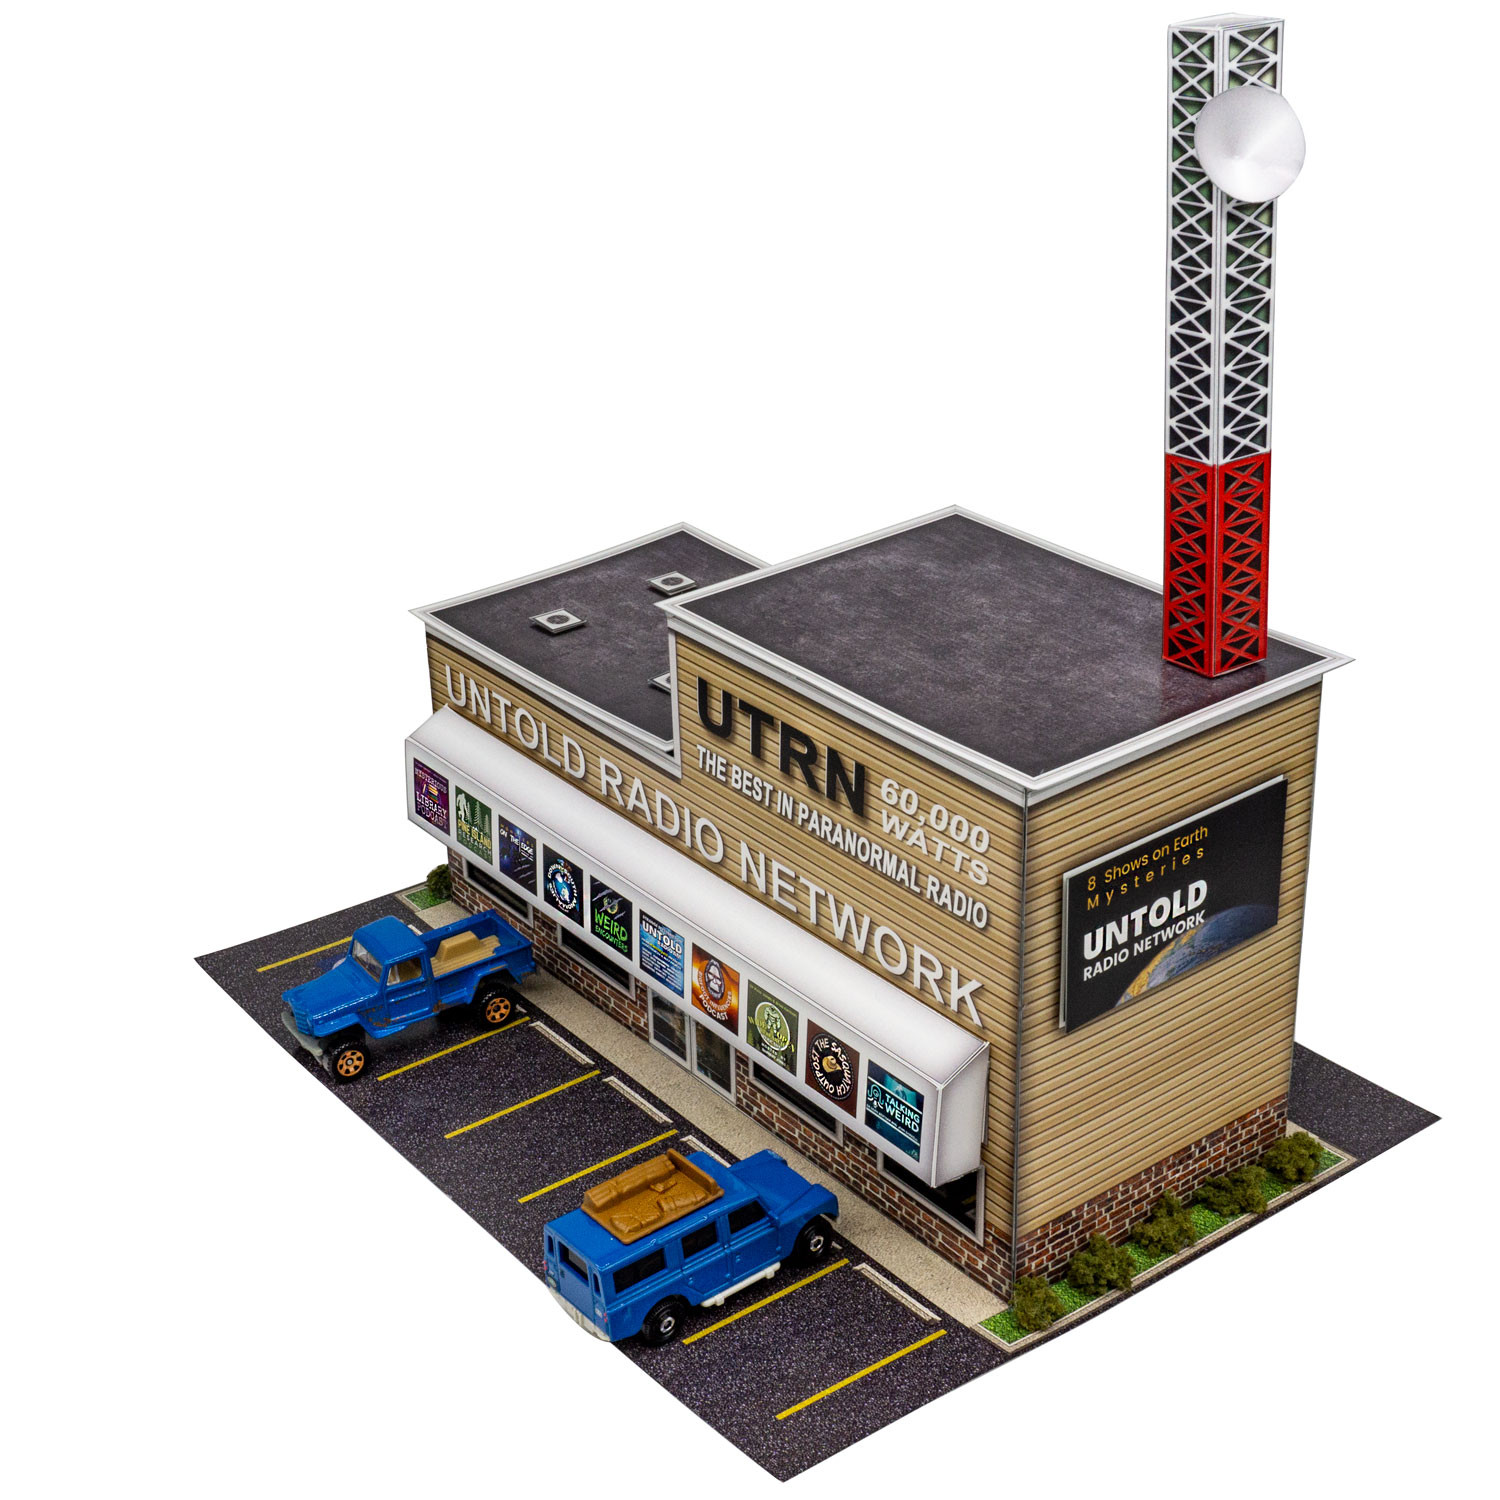 BK 6463 1:64 Scale "Untold Radio Station" Photo Real Scale Building Kit